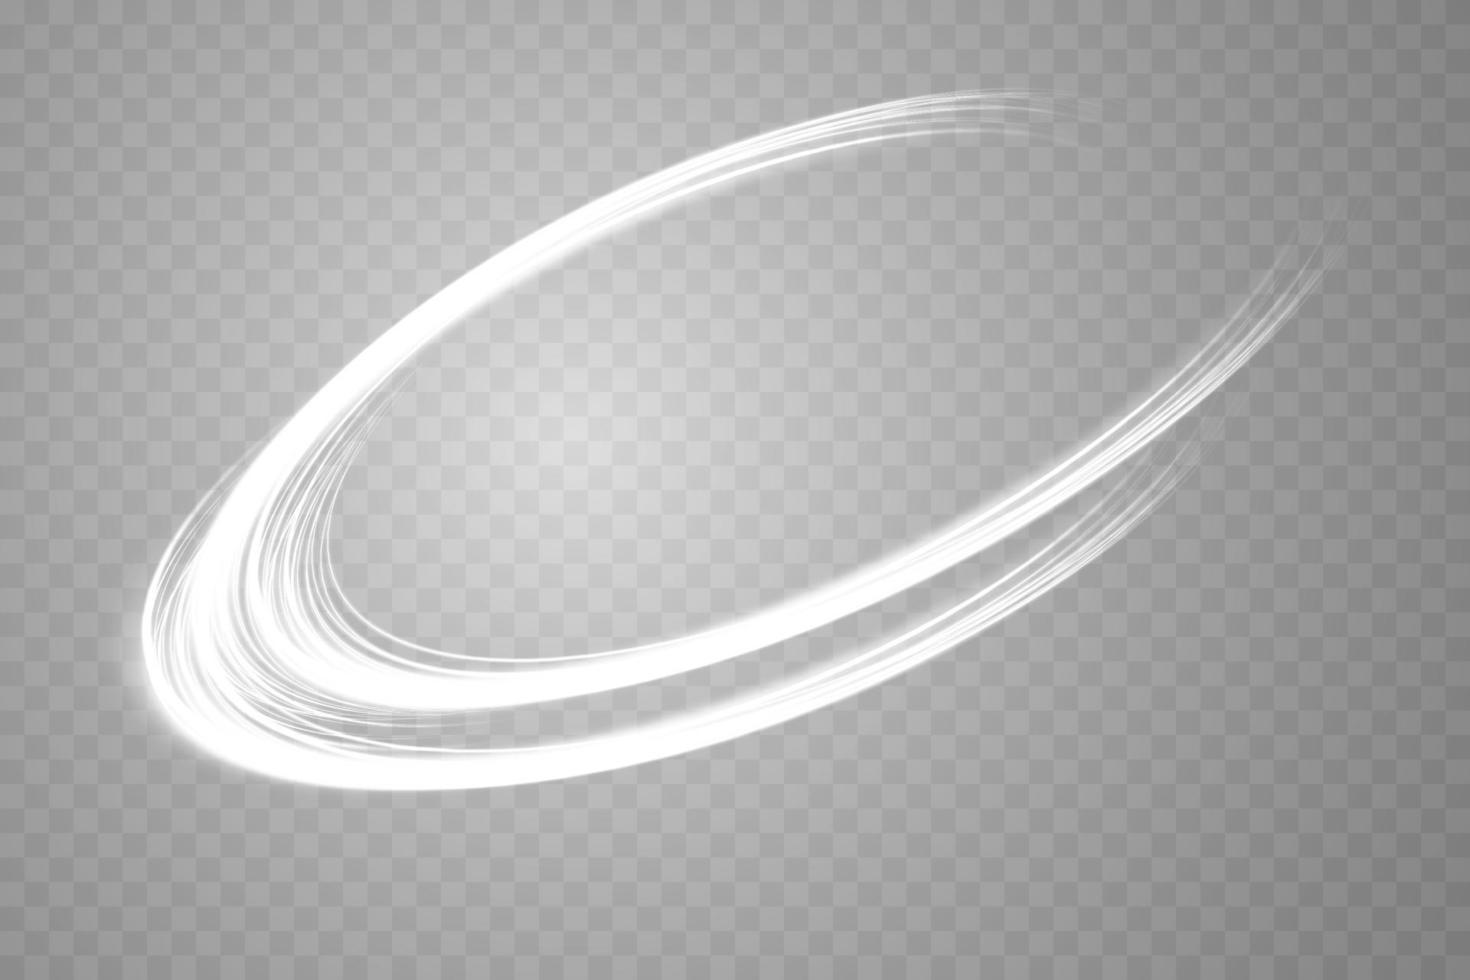 Abstract light lines of movement and speed with white color glitters. Light everyday glowing effect. semicircular wave, light trail curve swirl vector